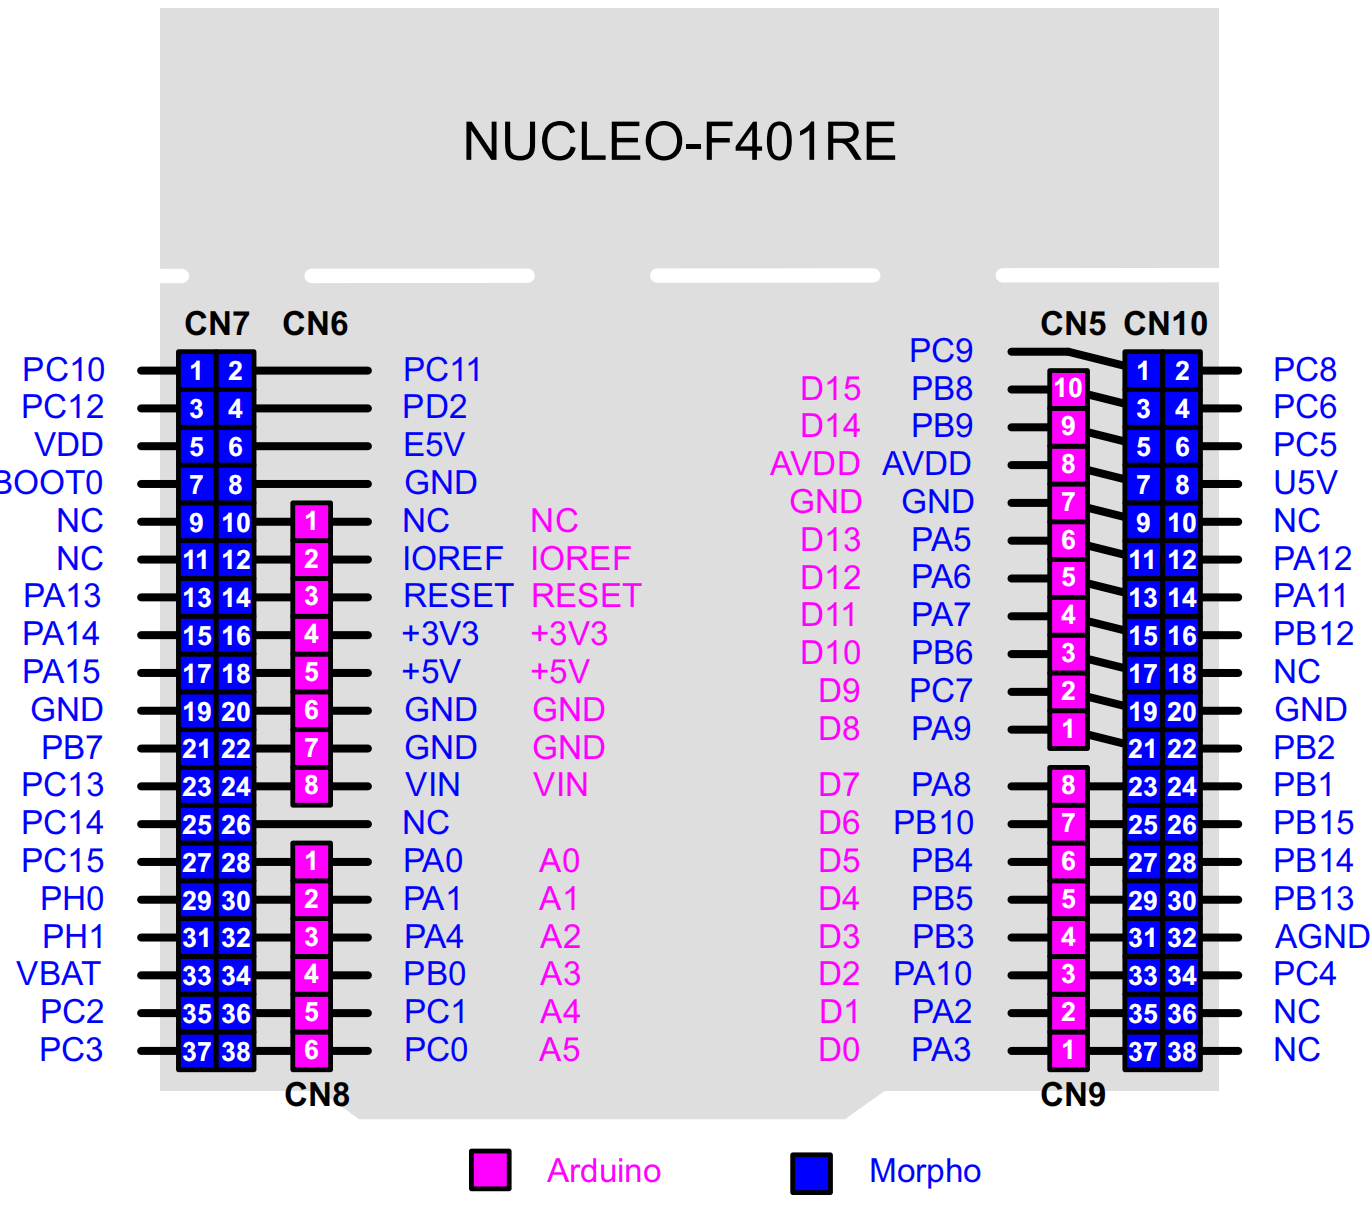 bsp/stm32/stm32f401-st-nucleo/applications/arduino_pinout/nucleo-f401-pinout.png